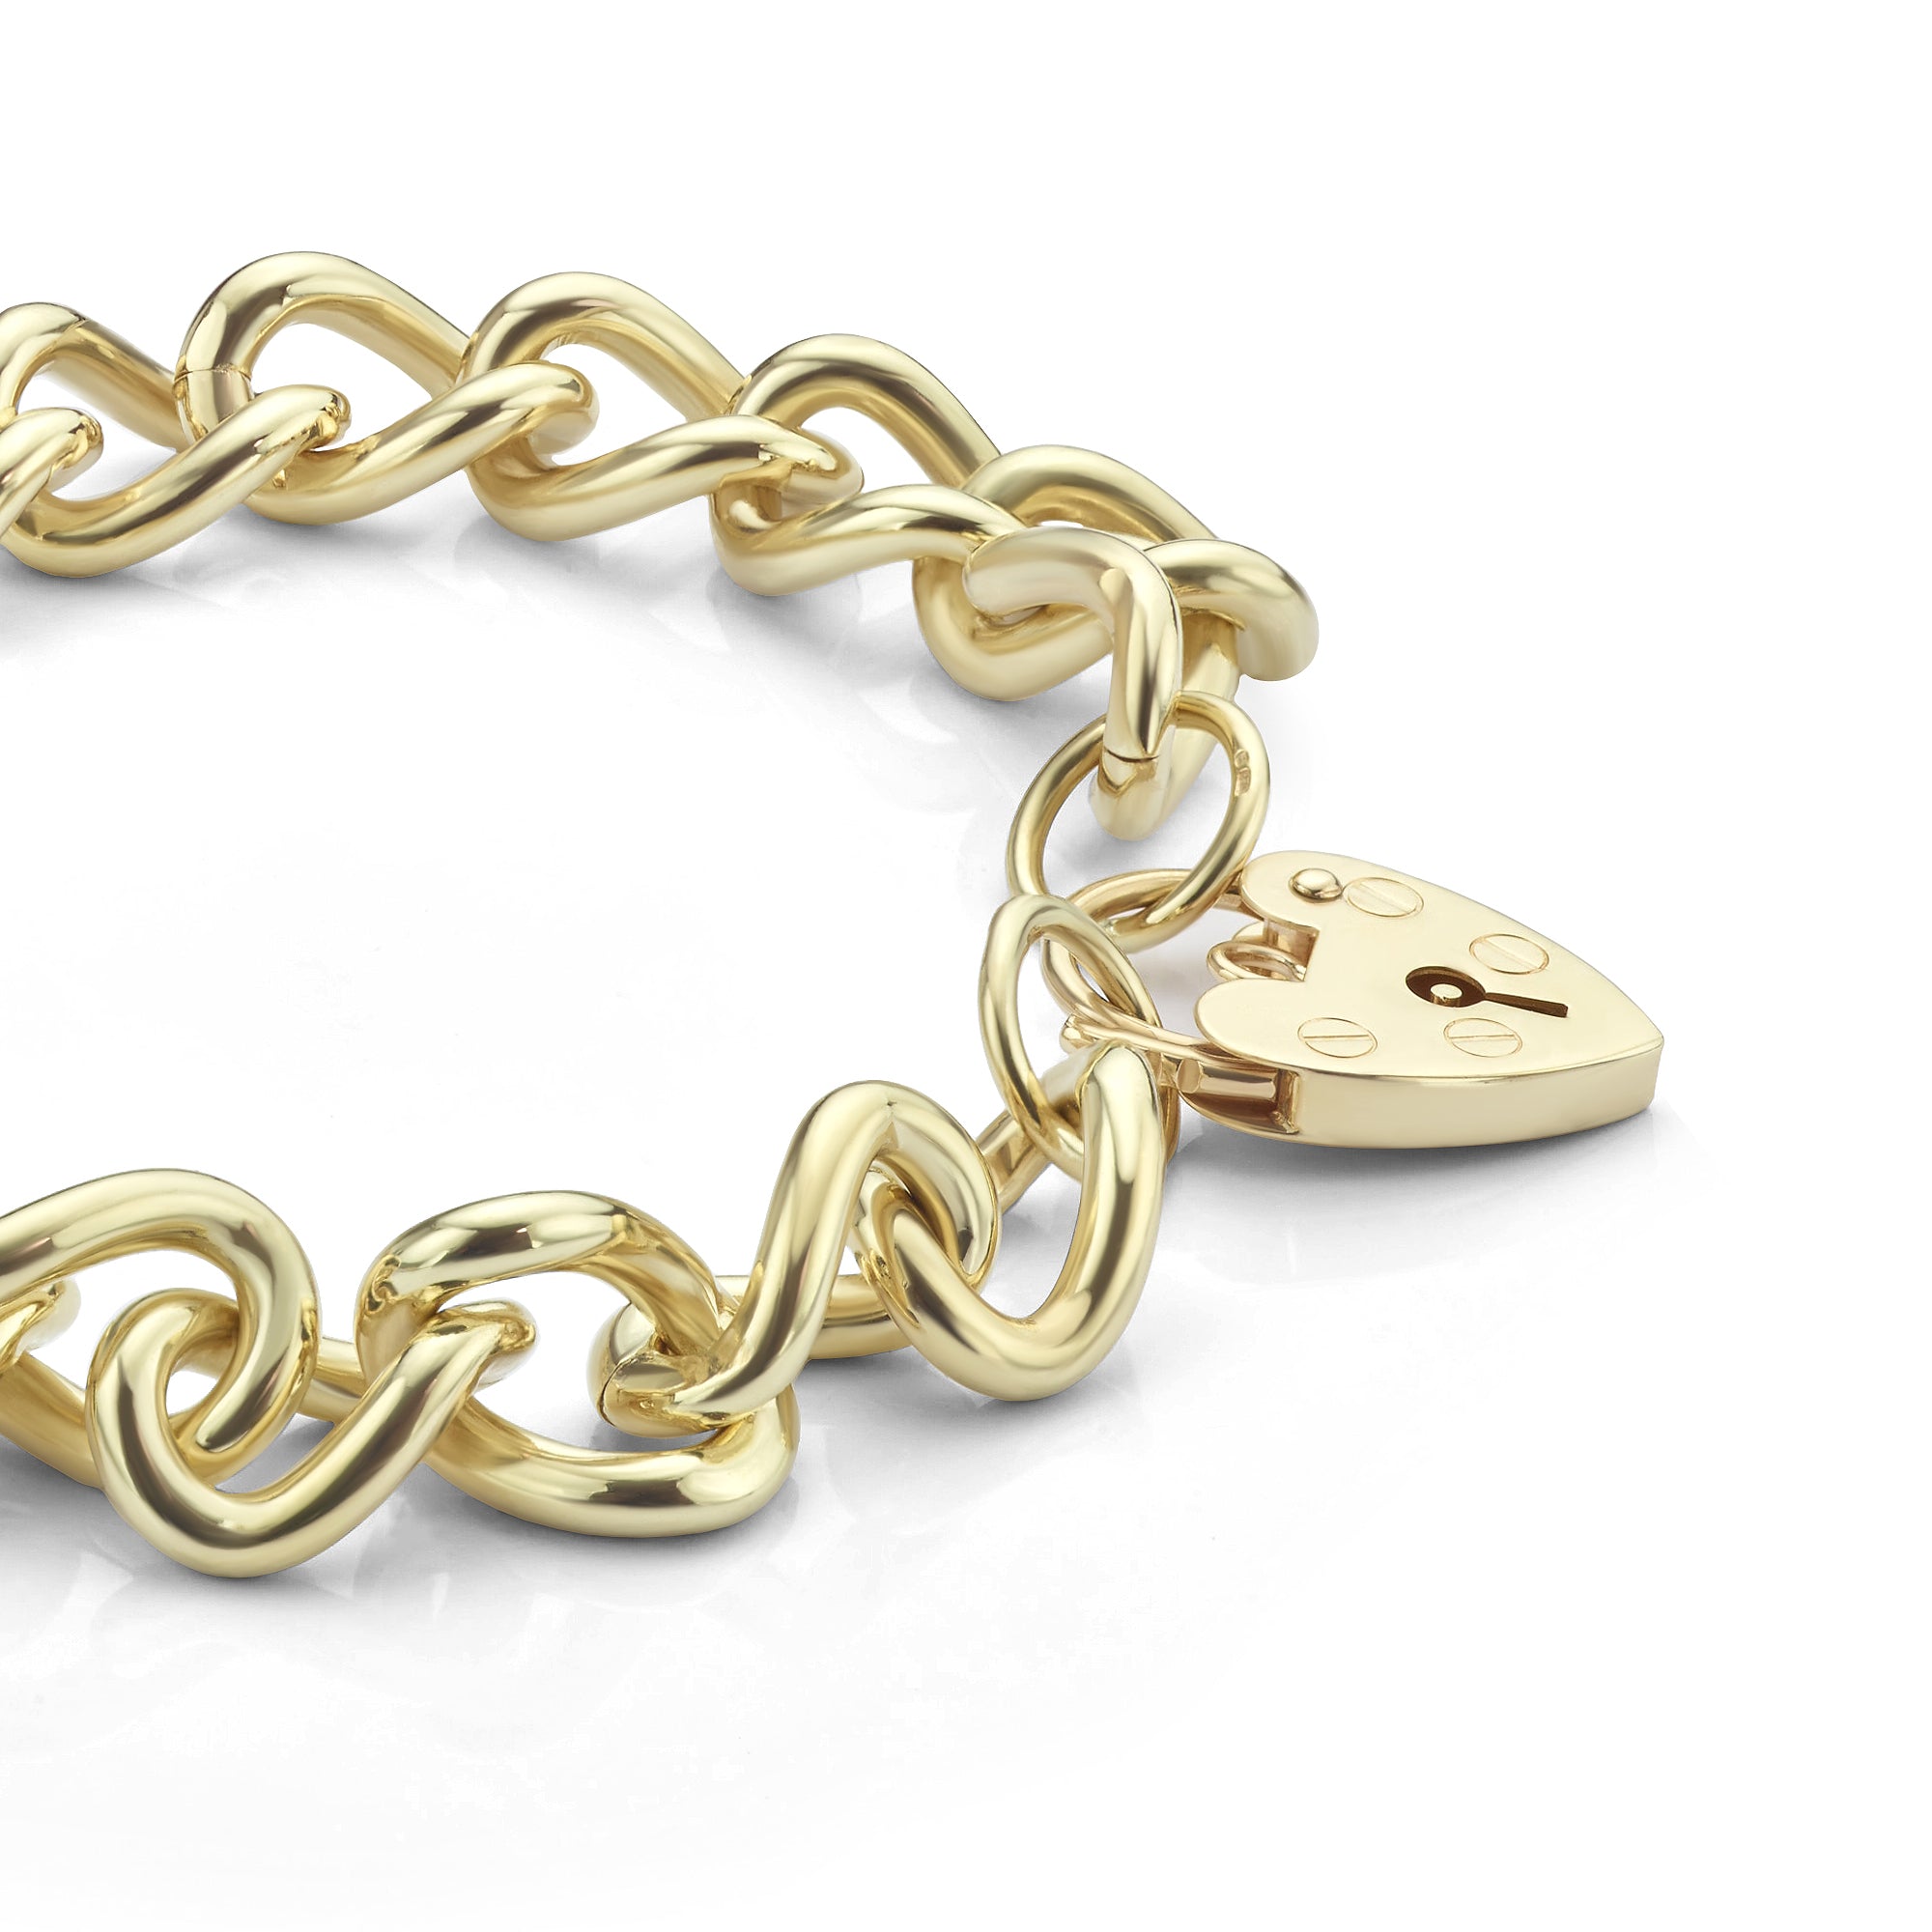 Close up view of the pre-owned gold ladies bracelet